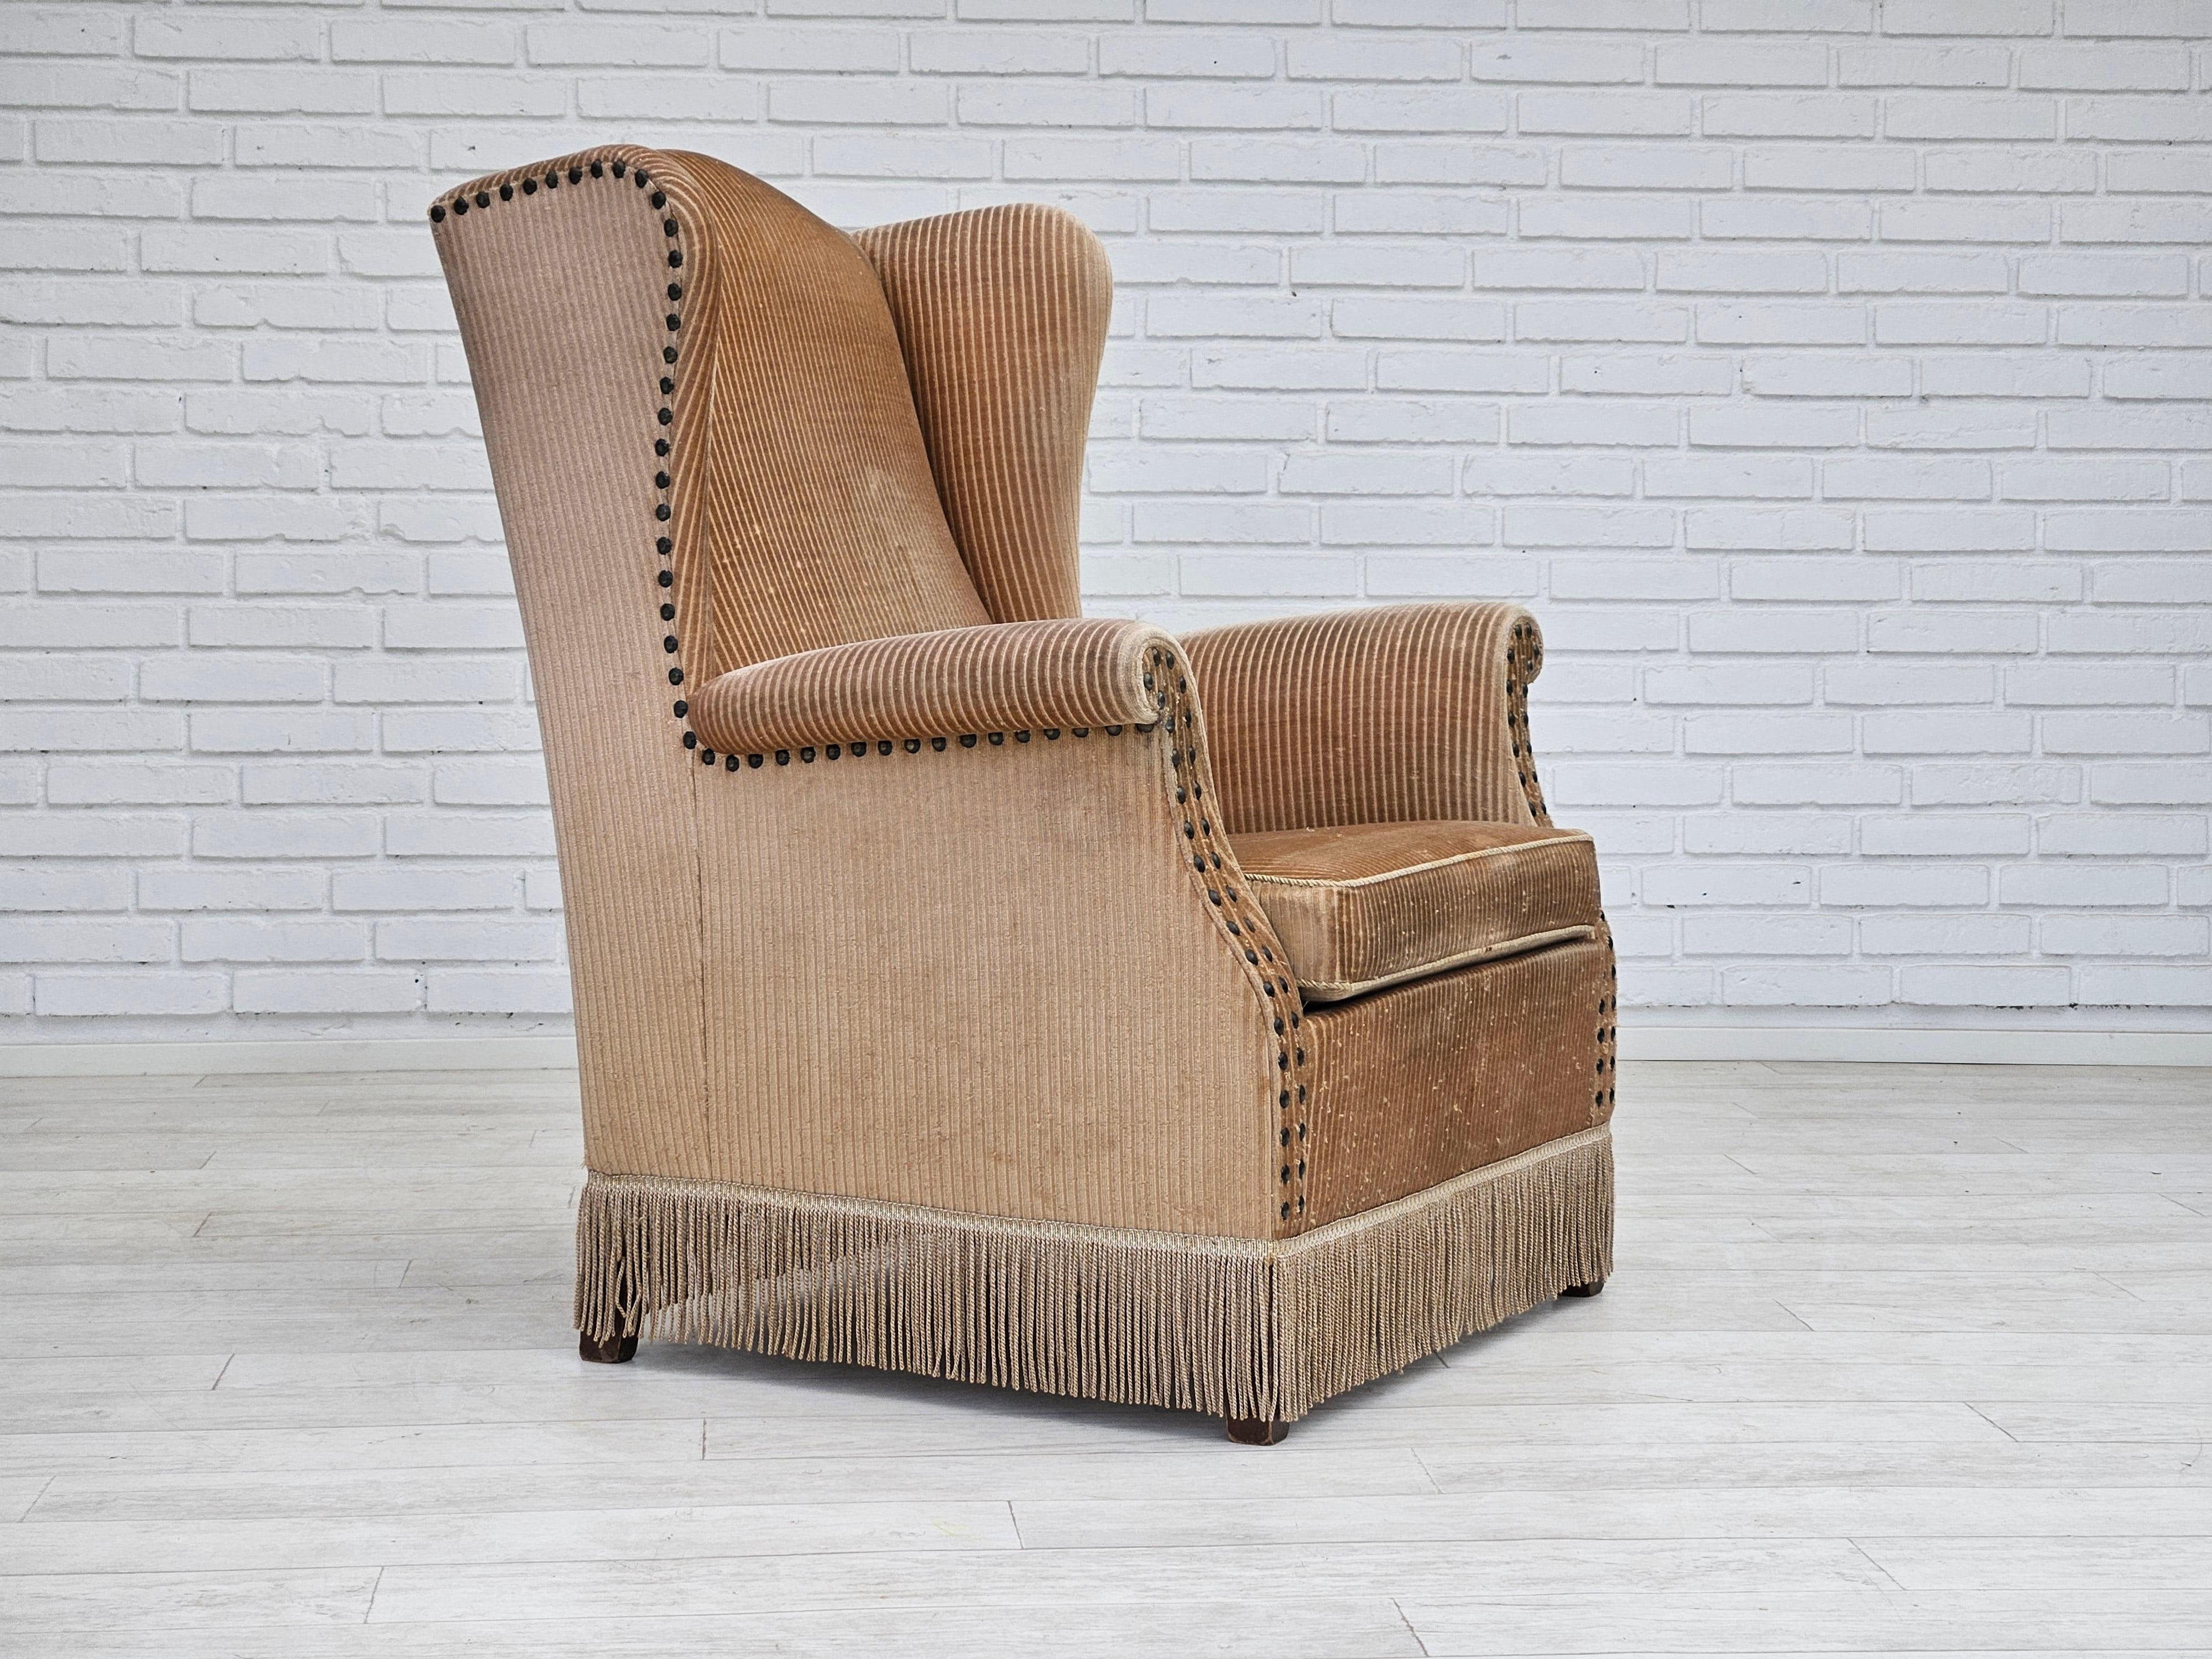 1970s, Danish design. High back armchair in beige corduroy. Original good condition: no smells and no stains. Ash wood legs, springs in seat cushion. Manufactured by a Danish furniture manufacturer in about 1970-75.